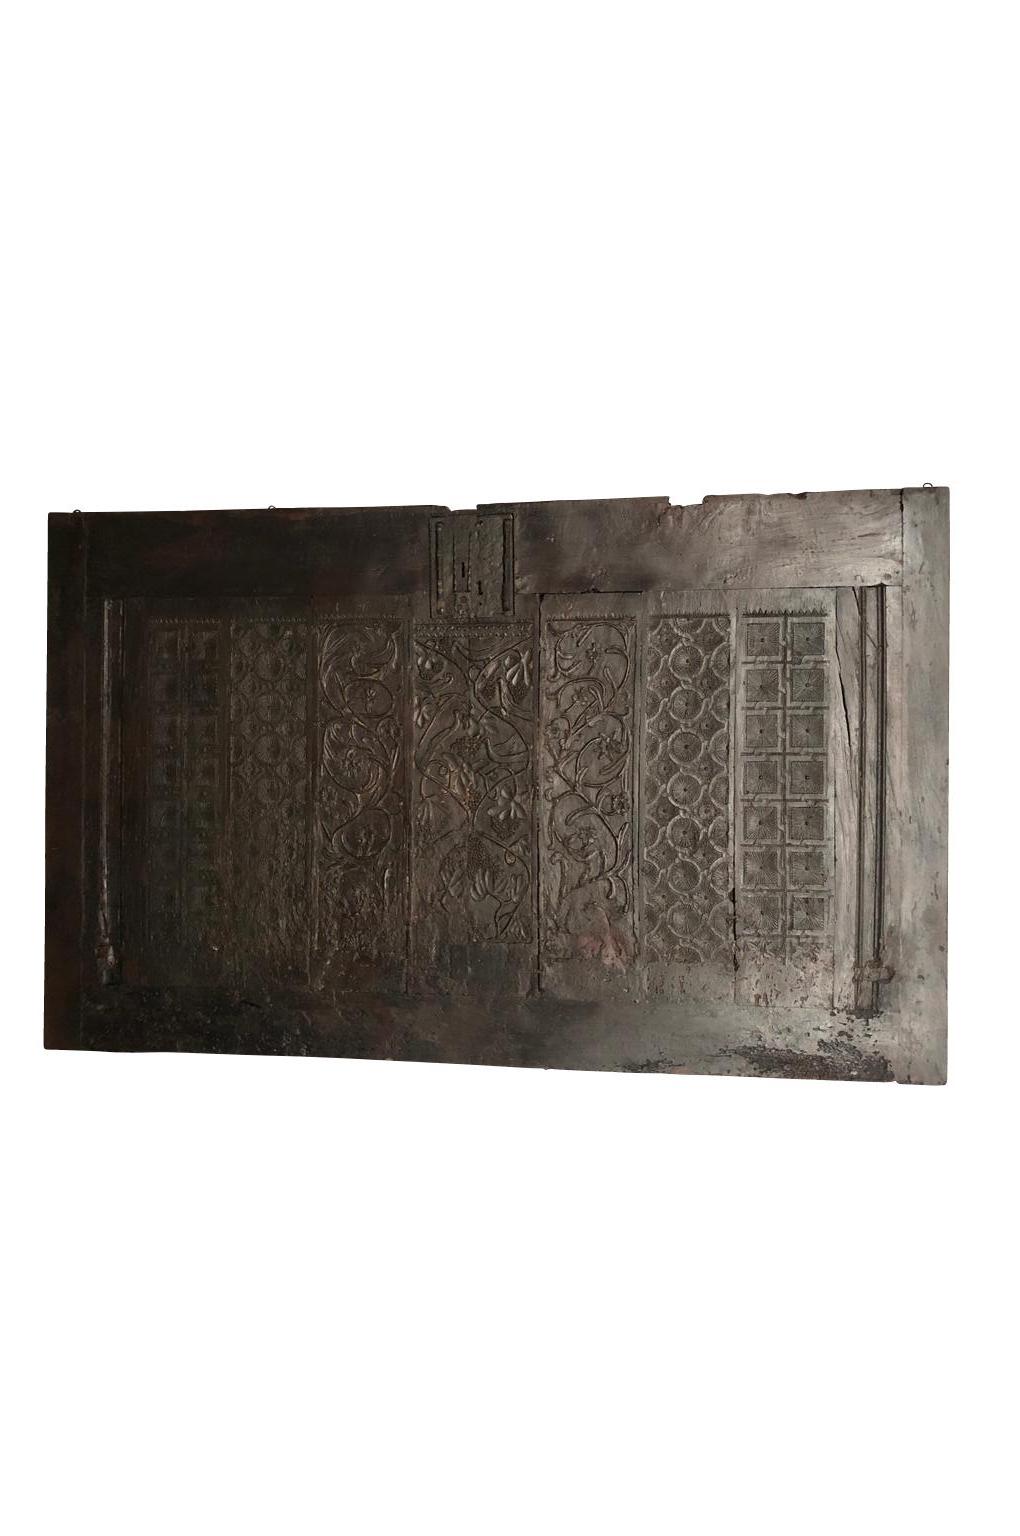 A stunning, early 17th century trunk facade of grand scale. Dated 1621. Soundly constructed from richly stained oak with beautiful carvings of grapes on the vine, birds and other decorative motifs. A wonderful architectural element to be built in or